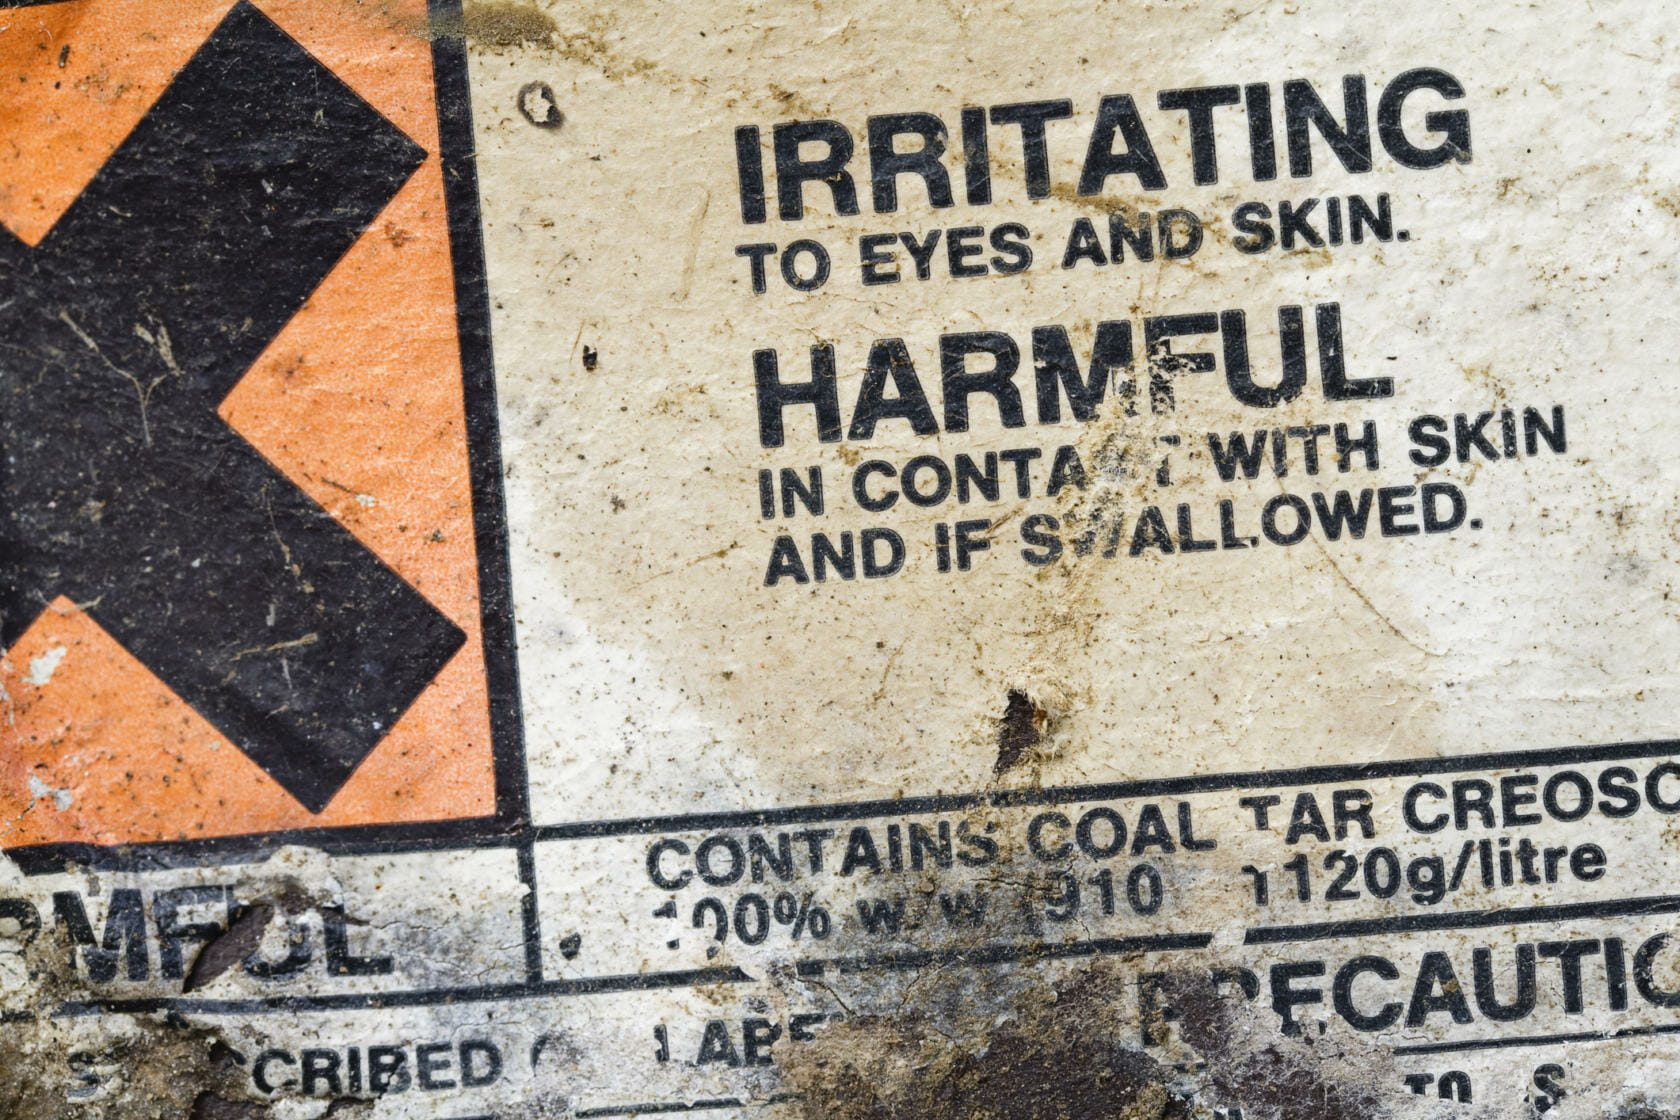 Warning label on a container of creosote indicating it to be harmful and a chemical irritant.